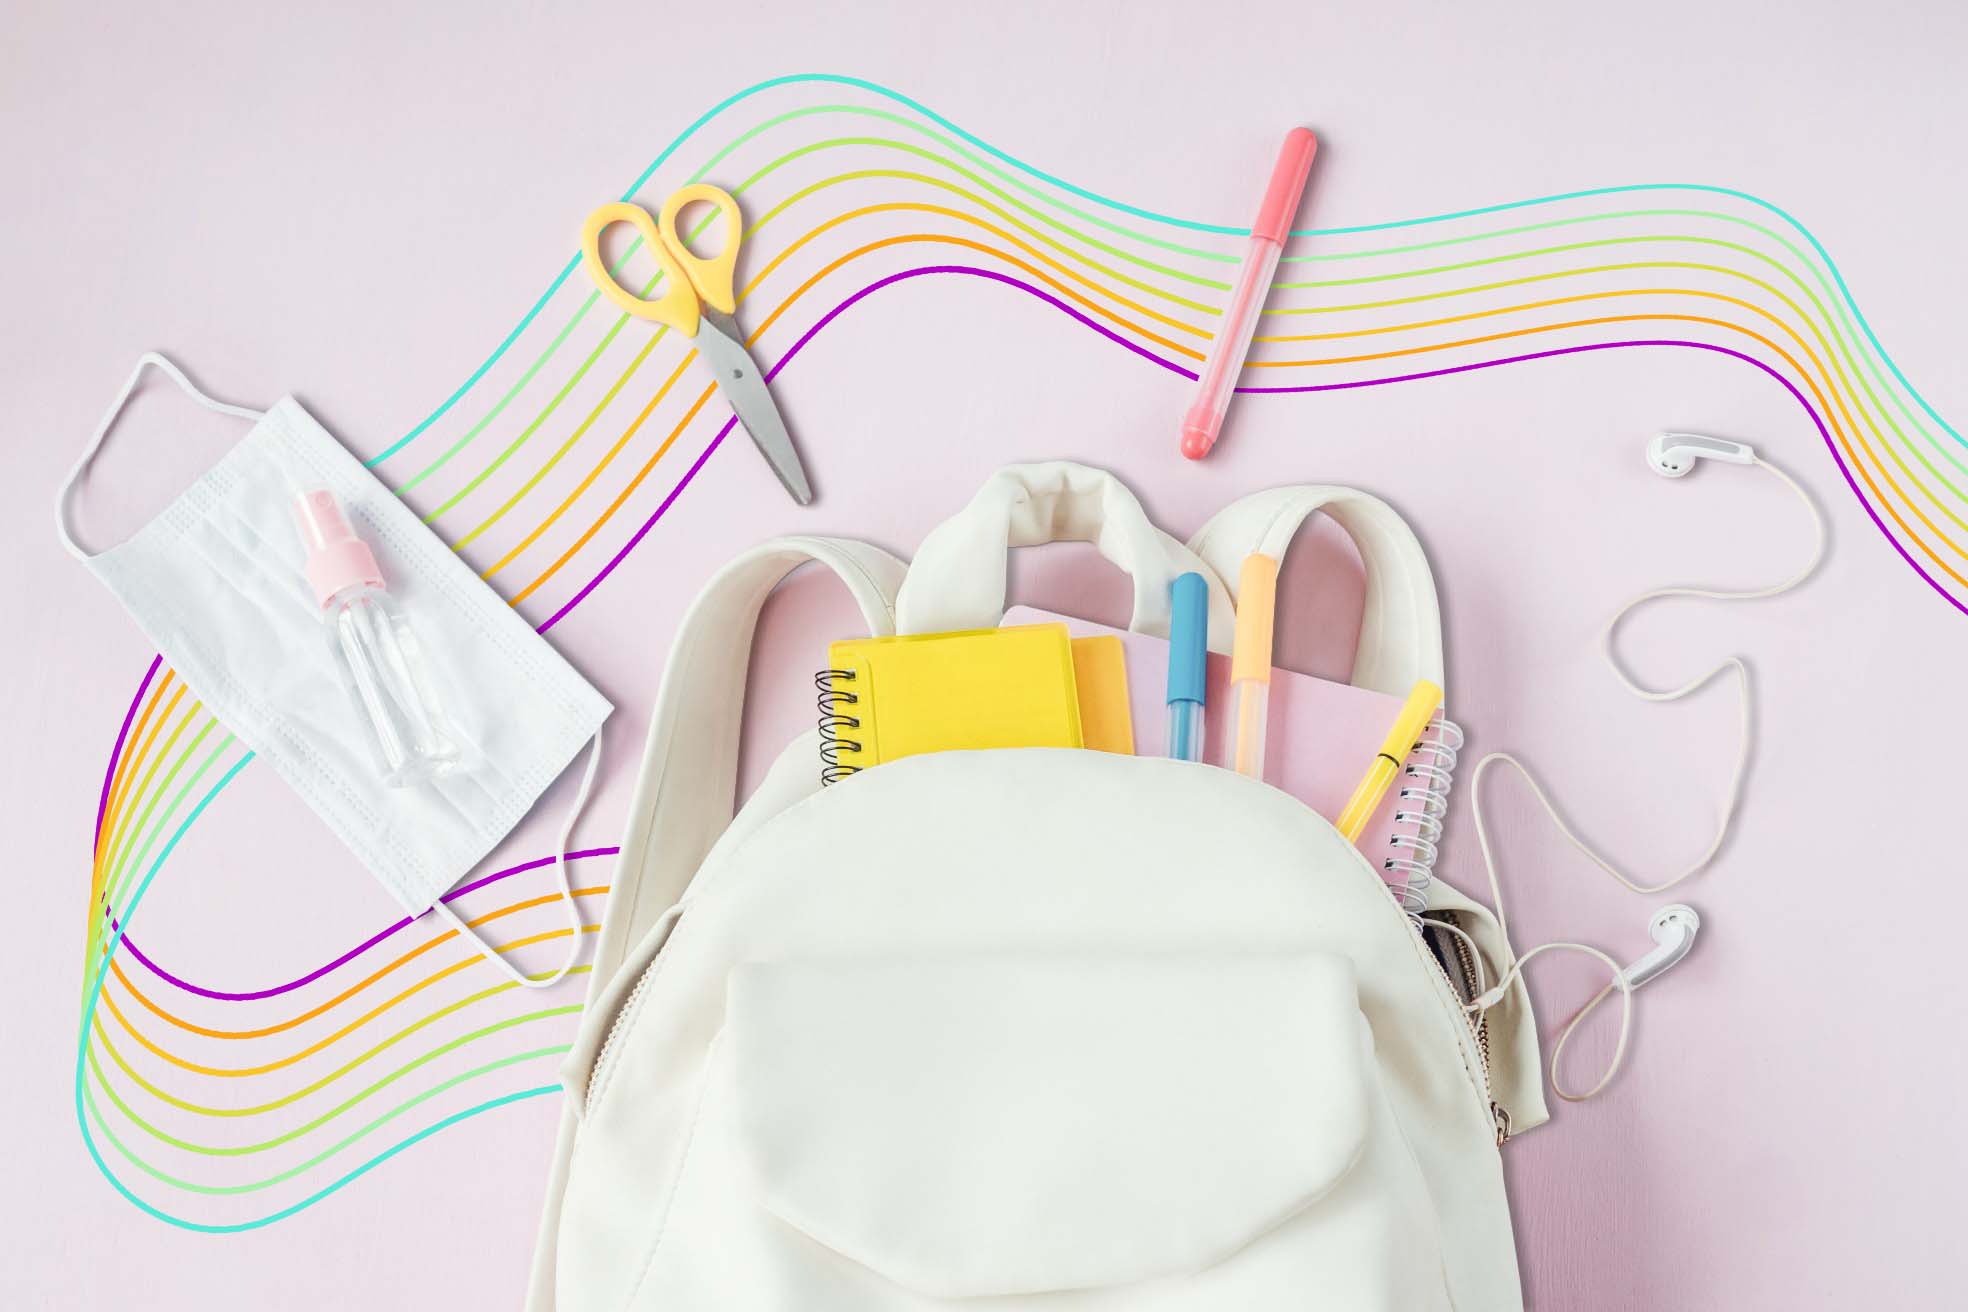 Best Back-to-School Marketing Campaigns (Plus the 'Worst Ad Ever